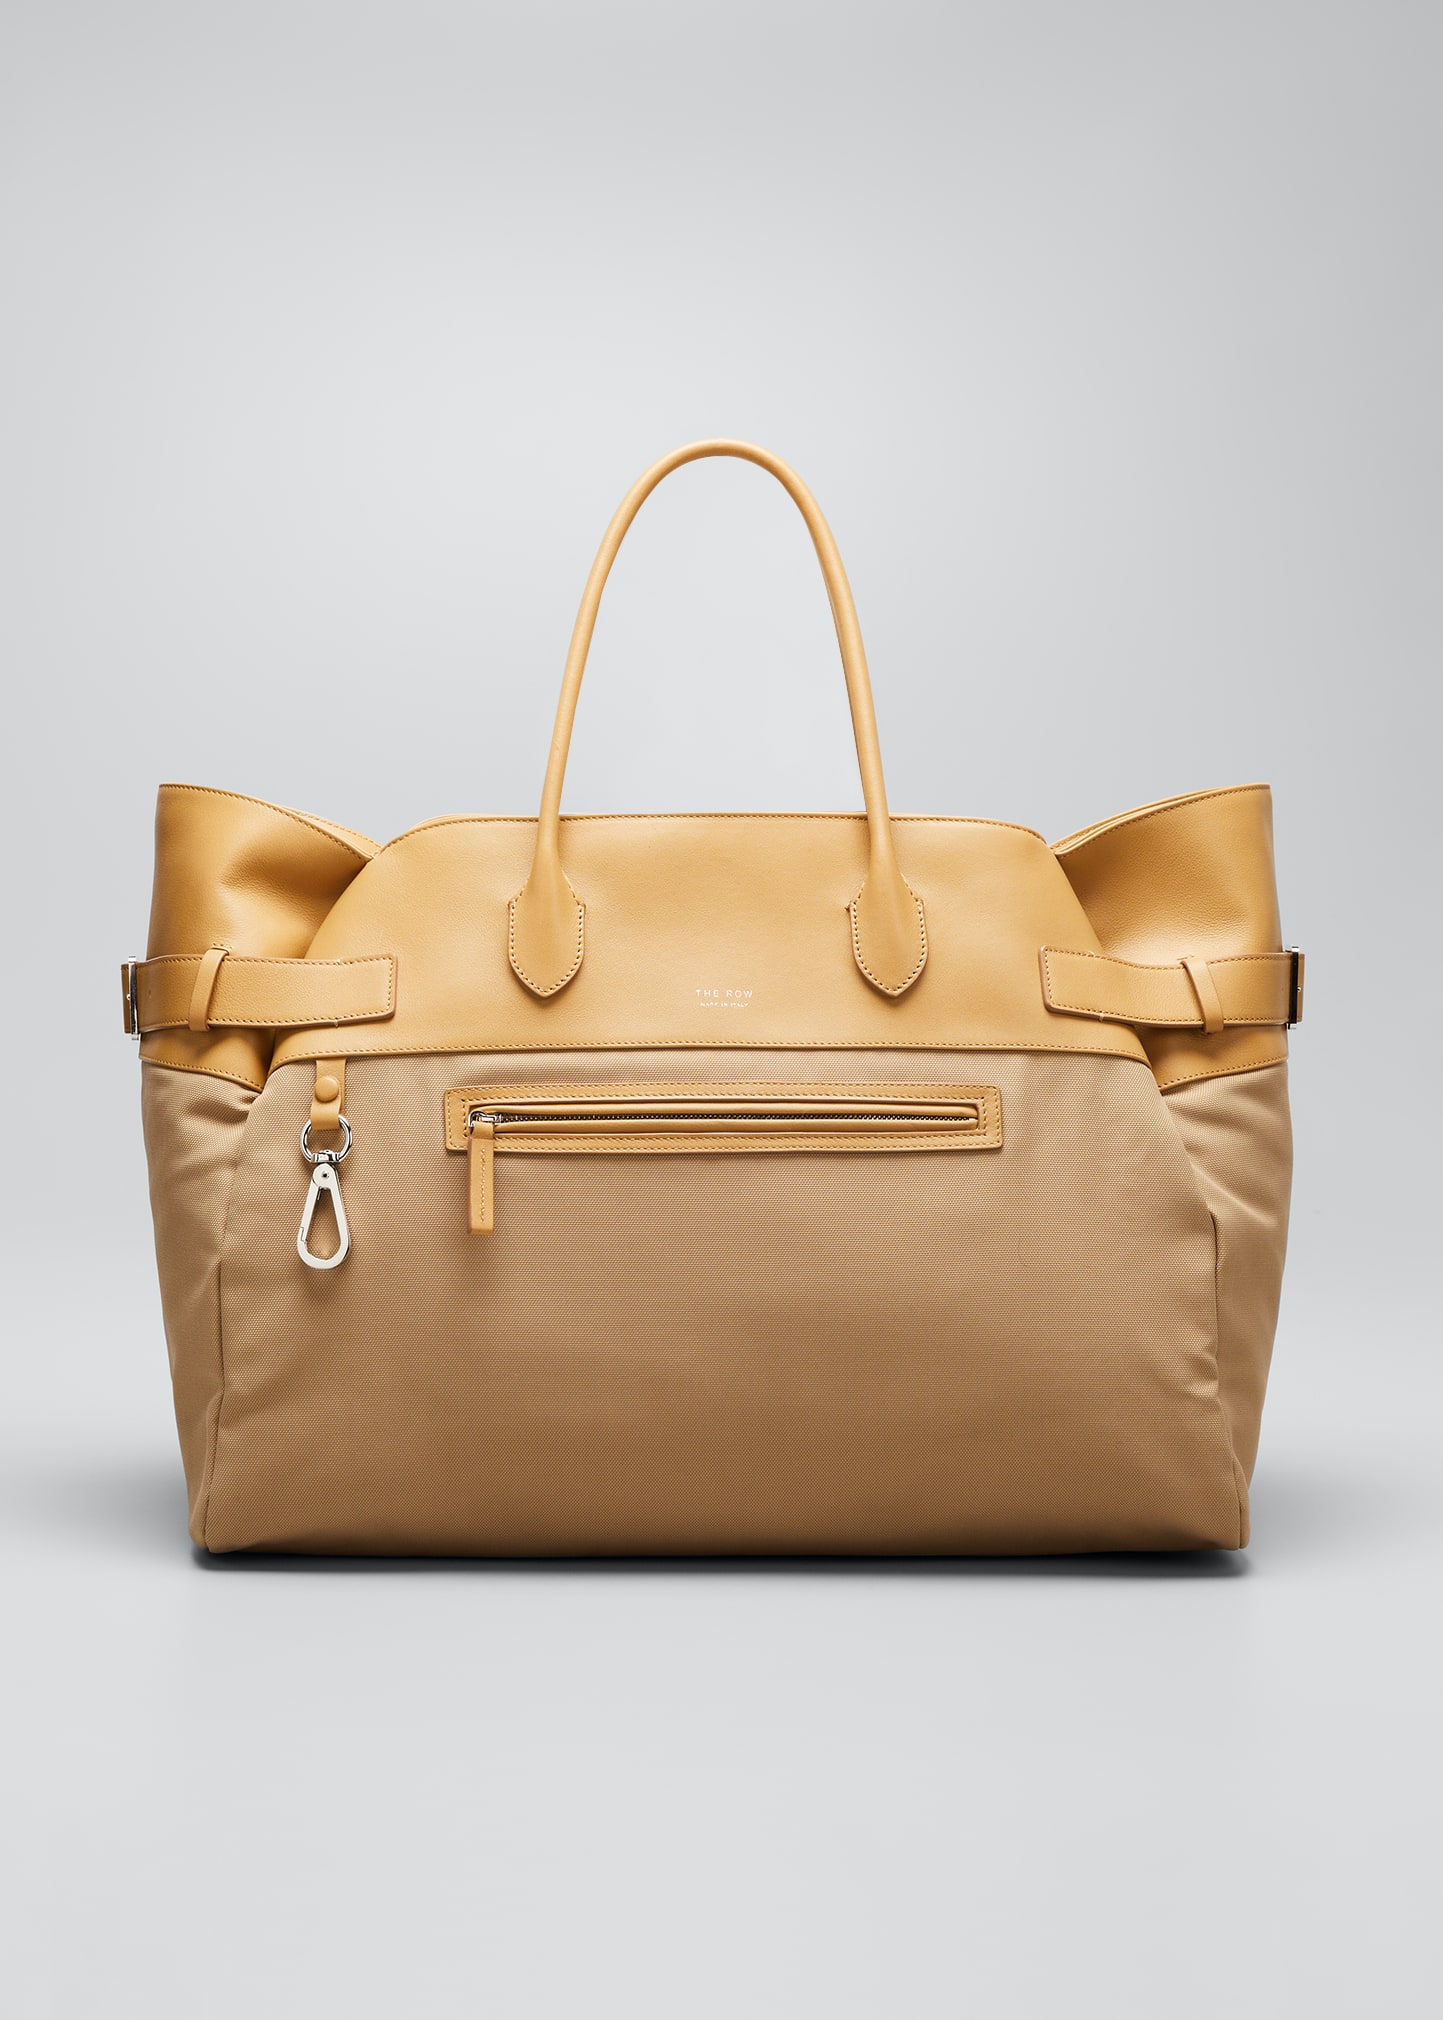 THE ROW Margaux 17 Inside Out Tote Bag in Nylon and Calf Leather